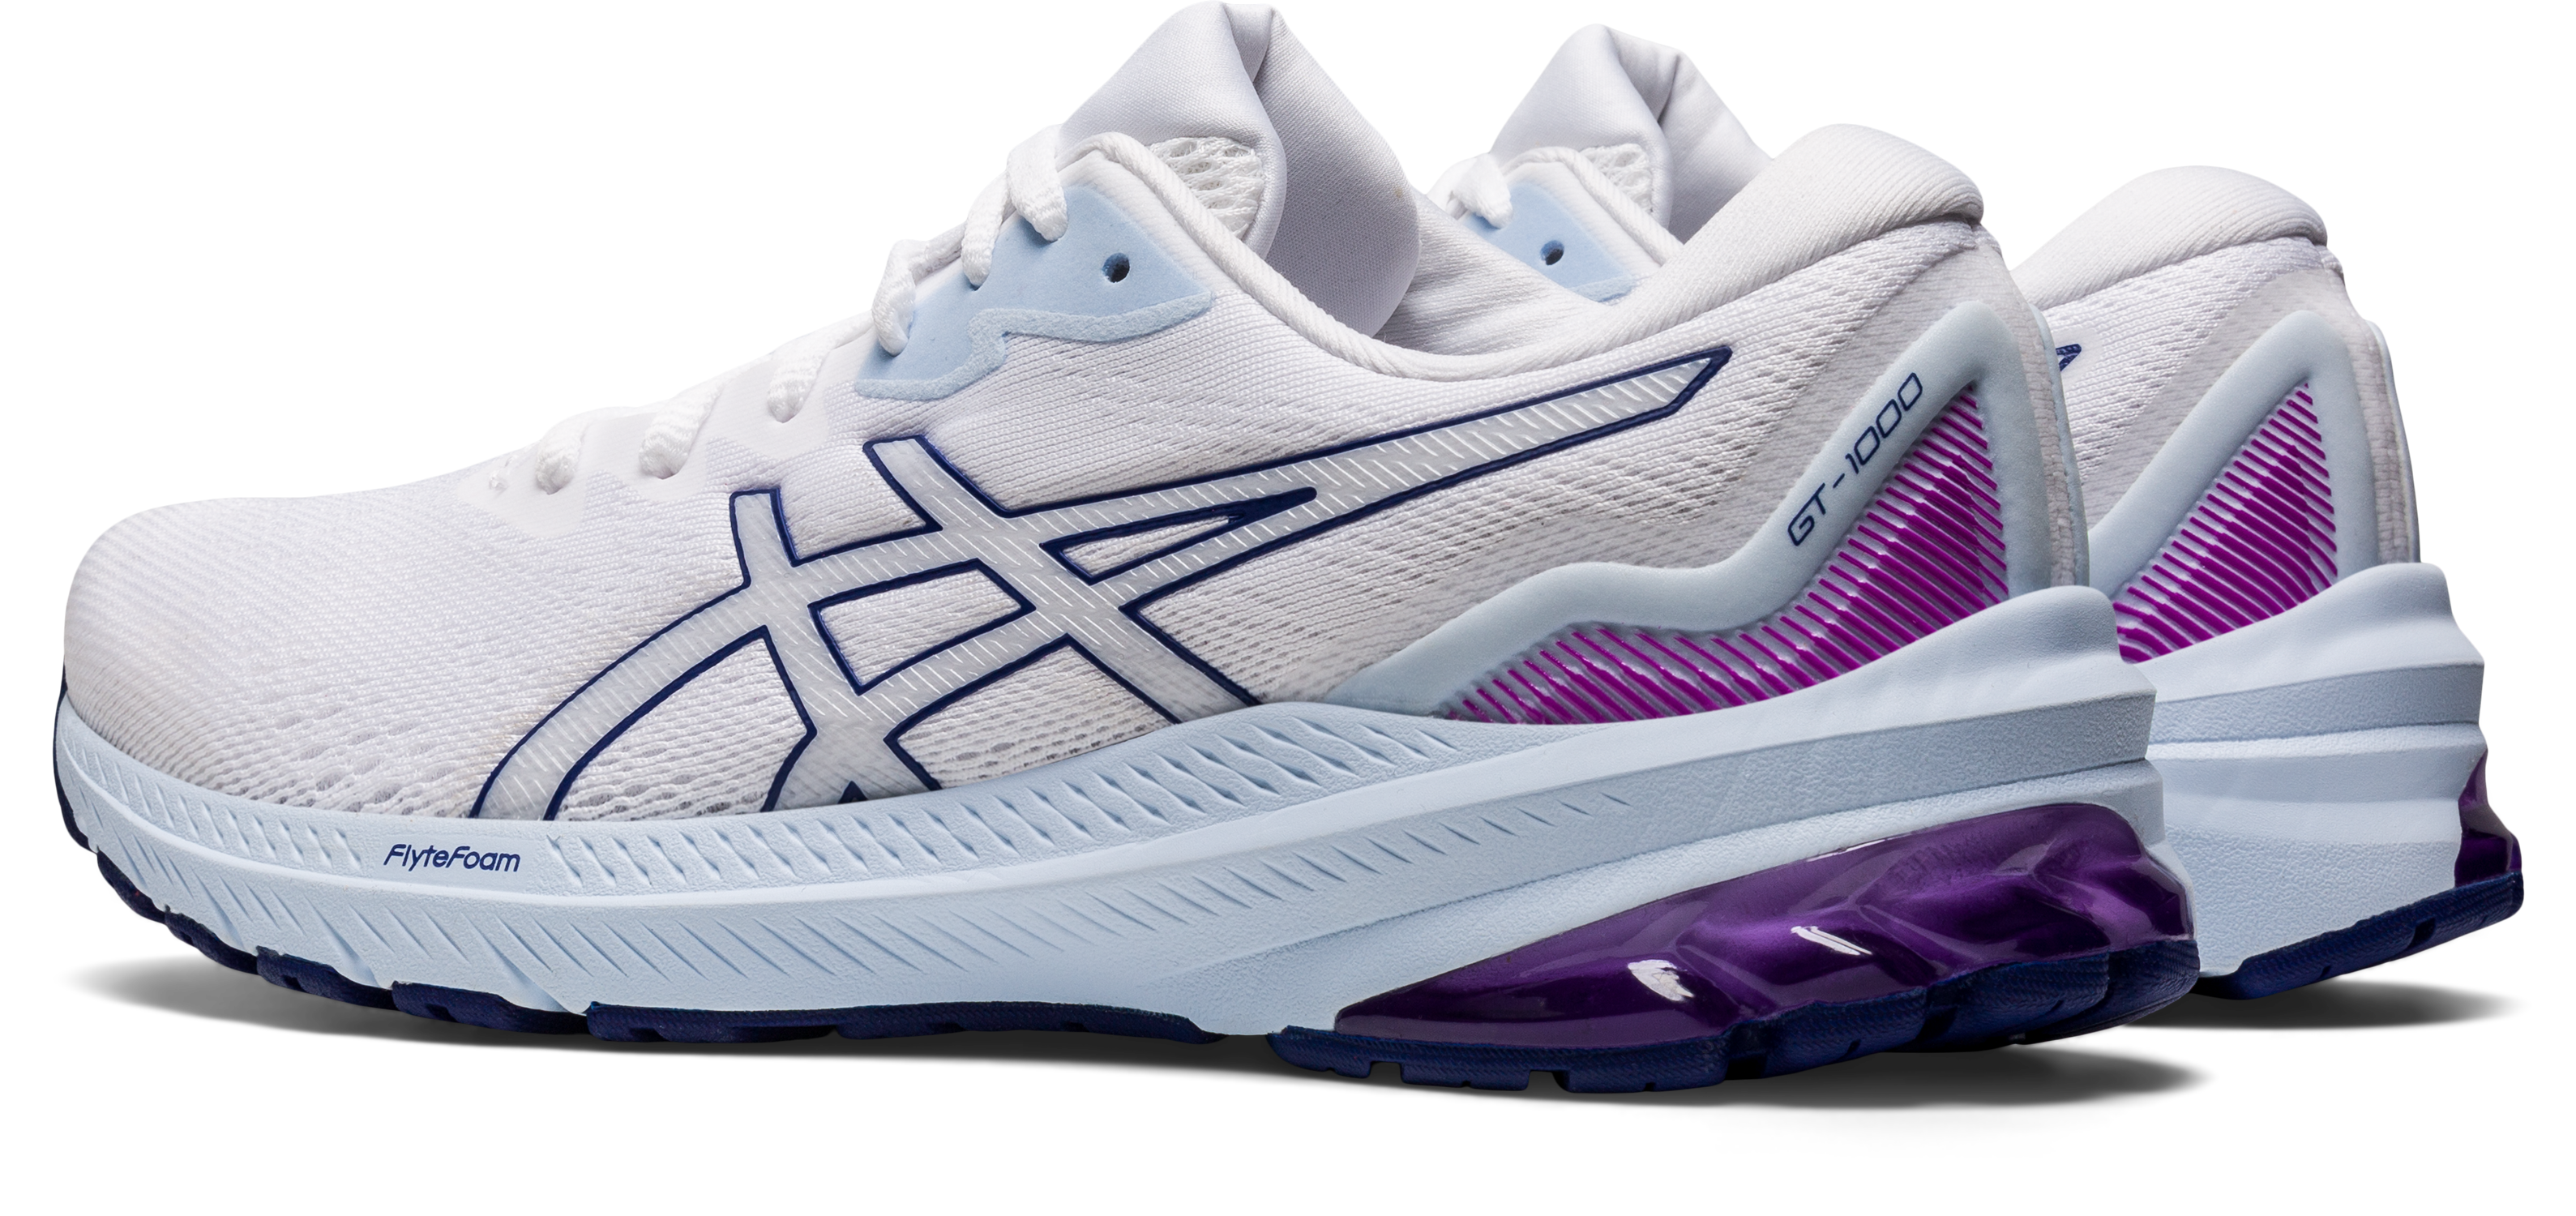 Asics Women's GT-1000 11 Running Shoes in White/Dive Blue